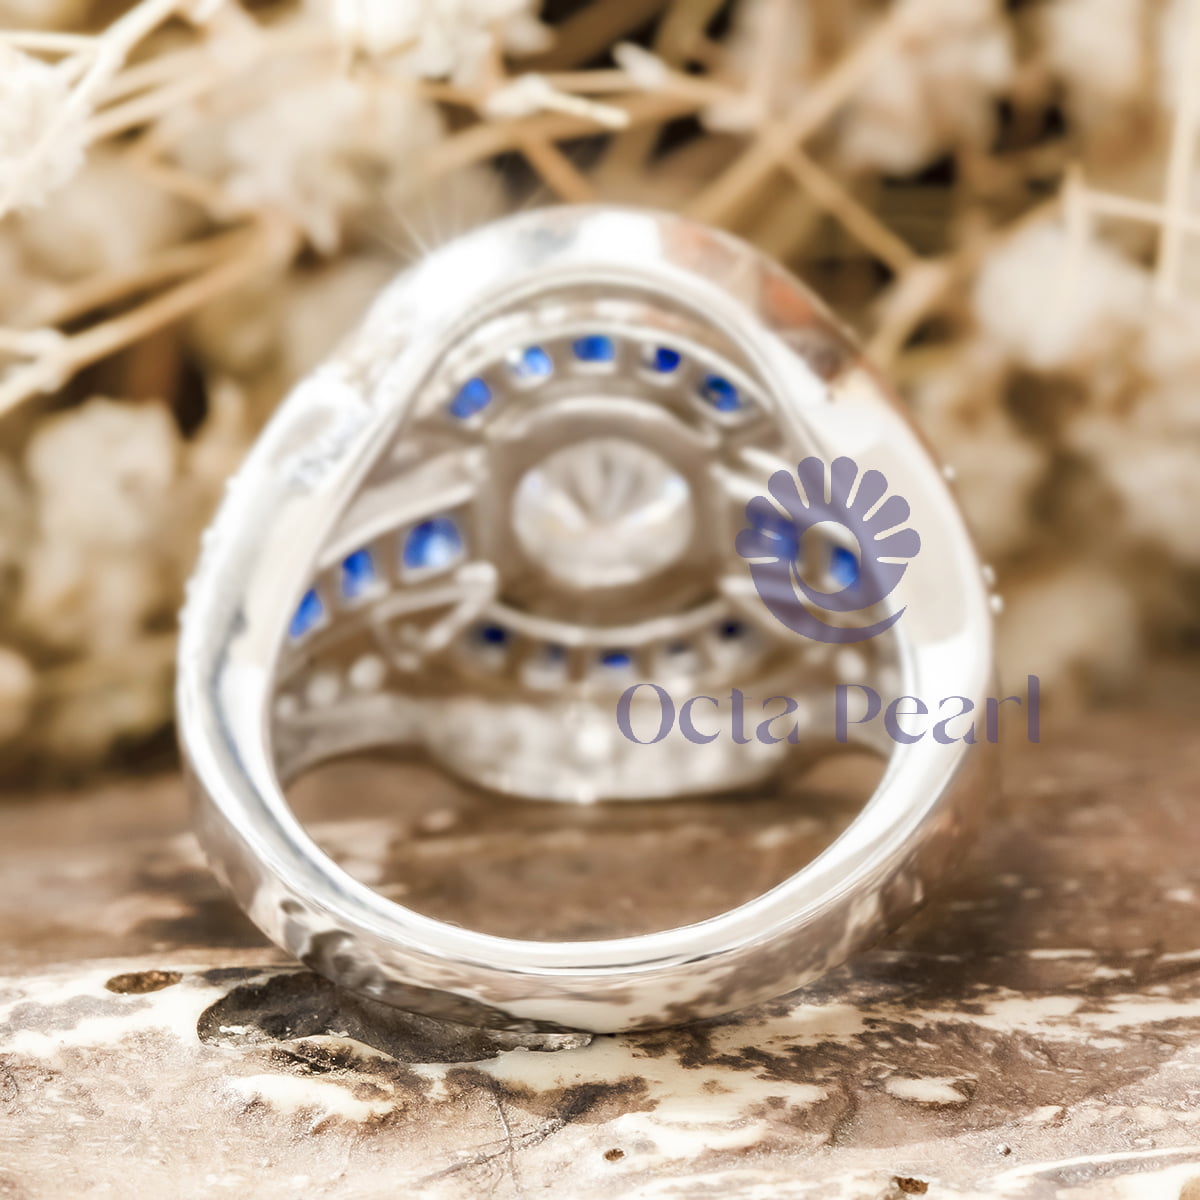 Antique Victorian-style Ring With Blue Sapphire